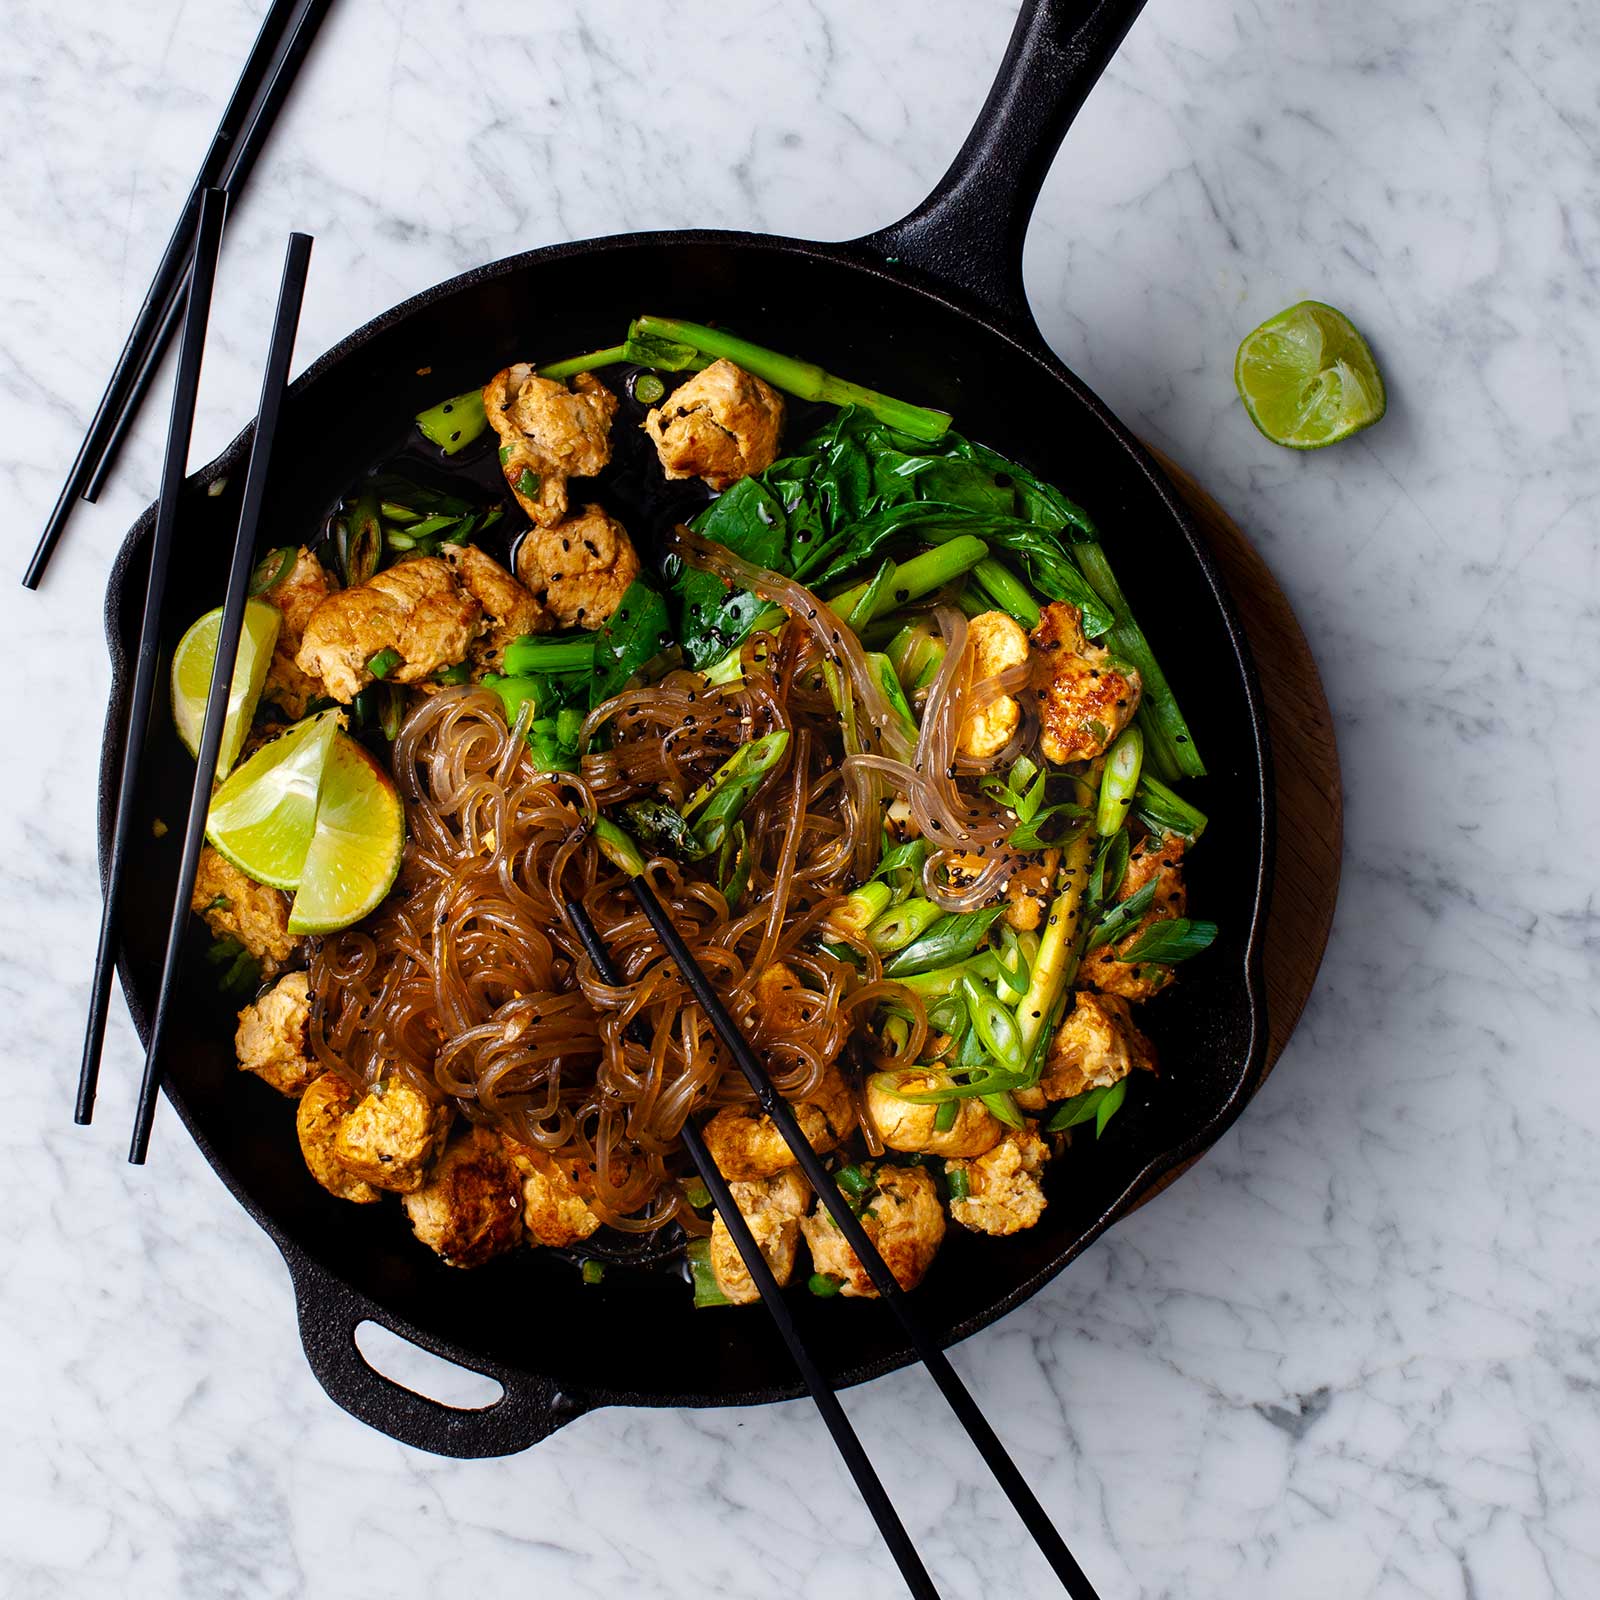 A cast iron pan with gluten-free sweet potato noodles and red curry chicken meatballs. Fresh lime wedges rest on top along with chopsticks, ready to eat straight from the pan.